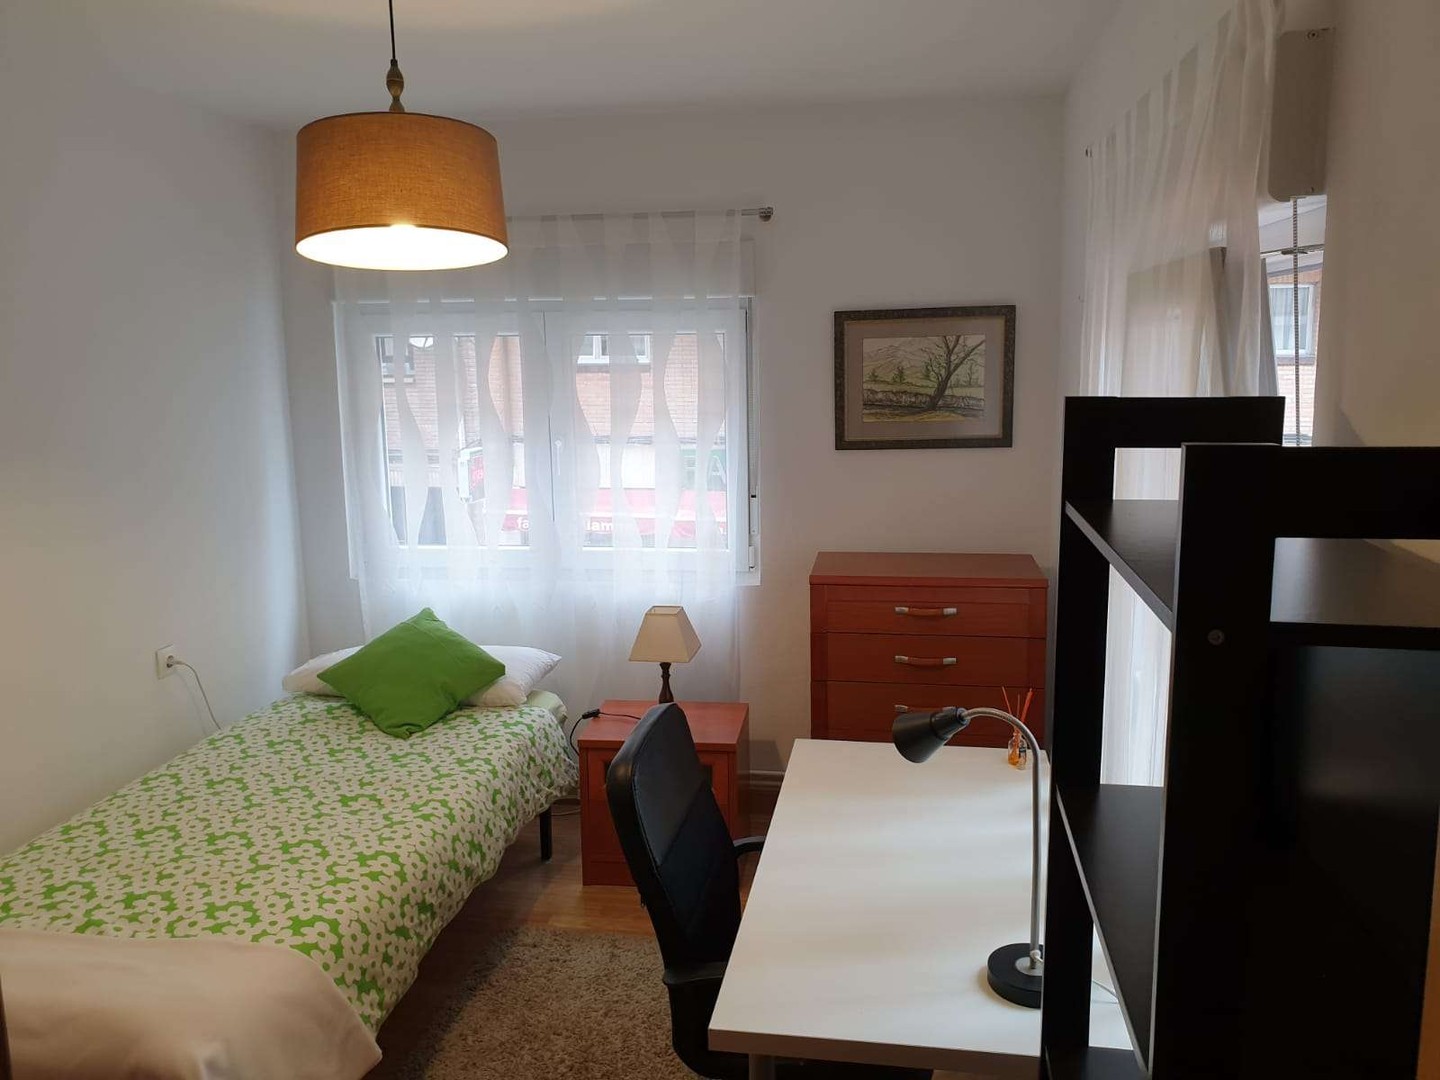 Room for rent in a shared flat in Oviedo